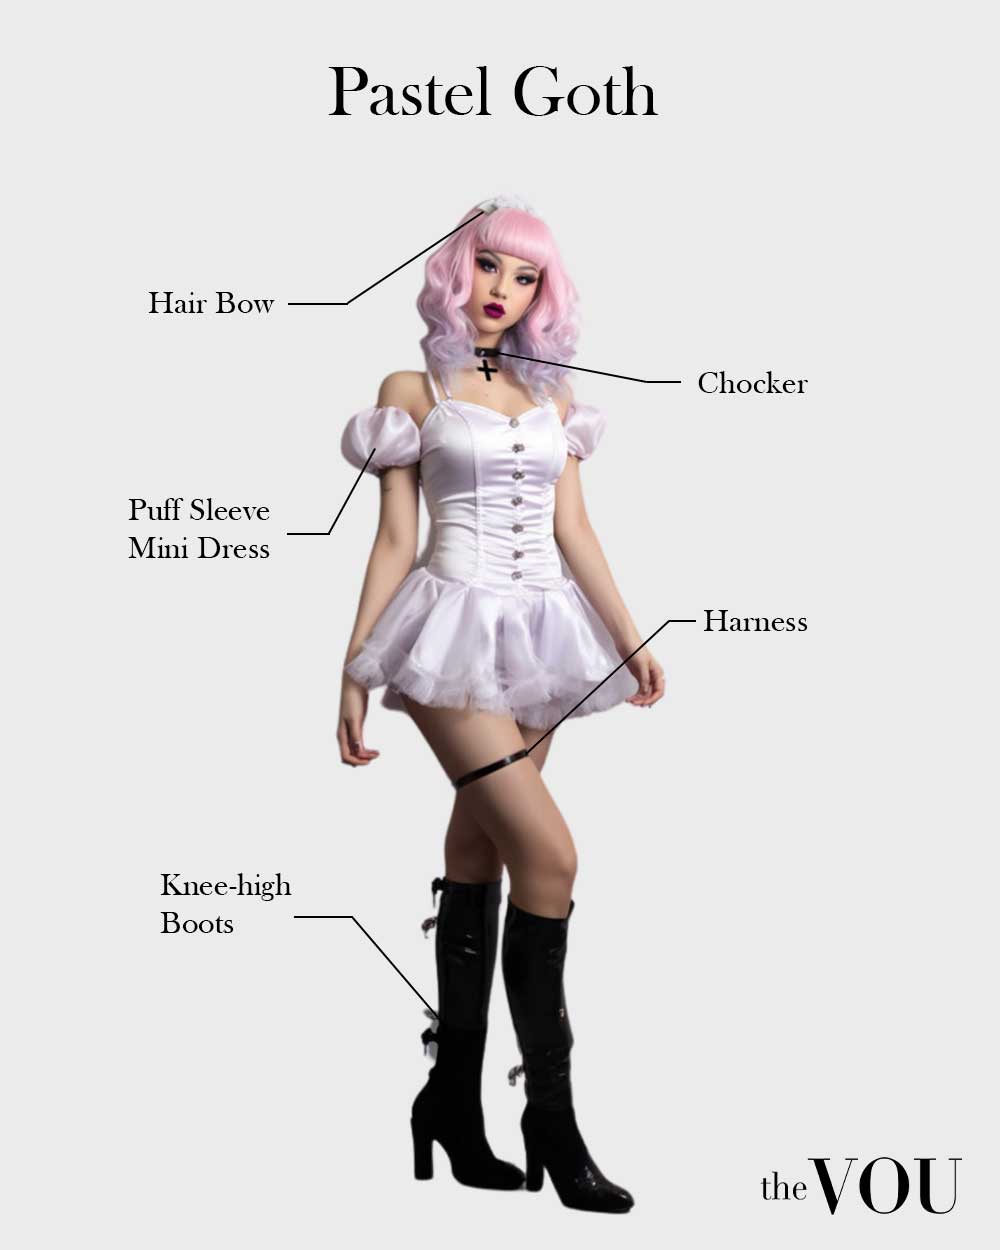 Pastel Goth outfit elements